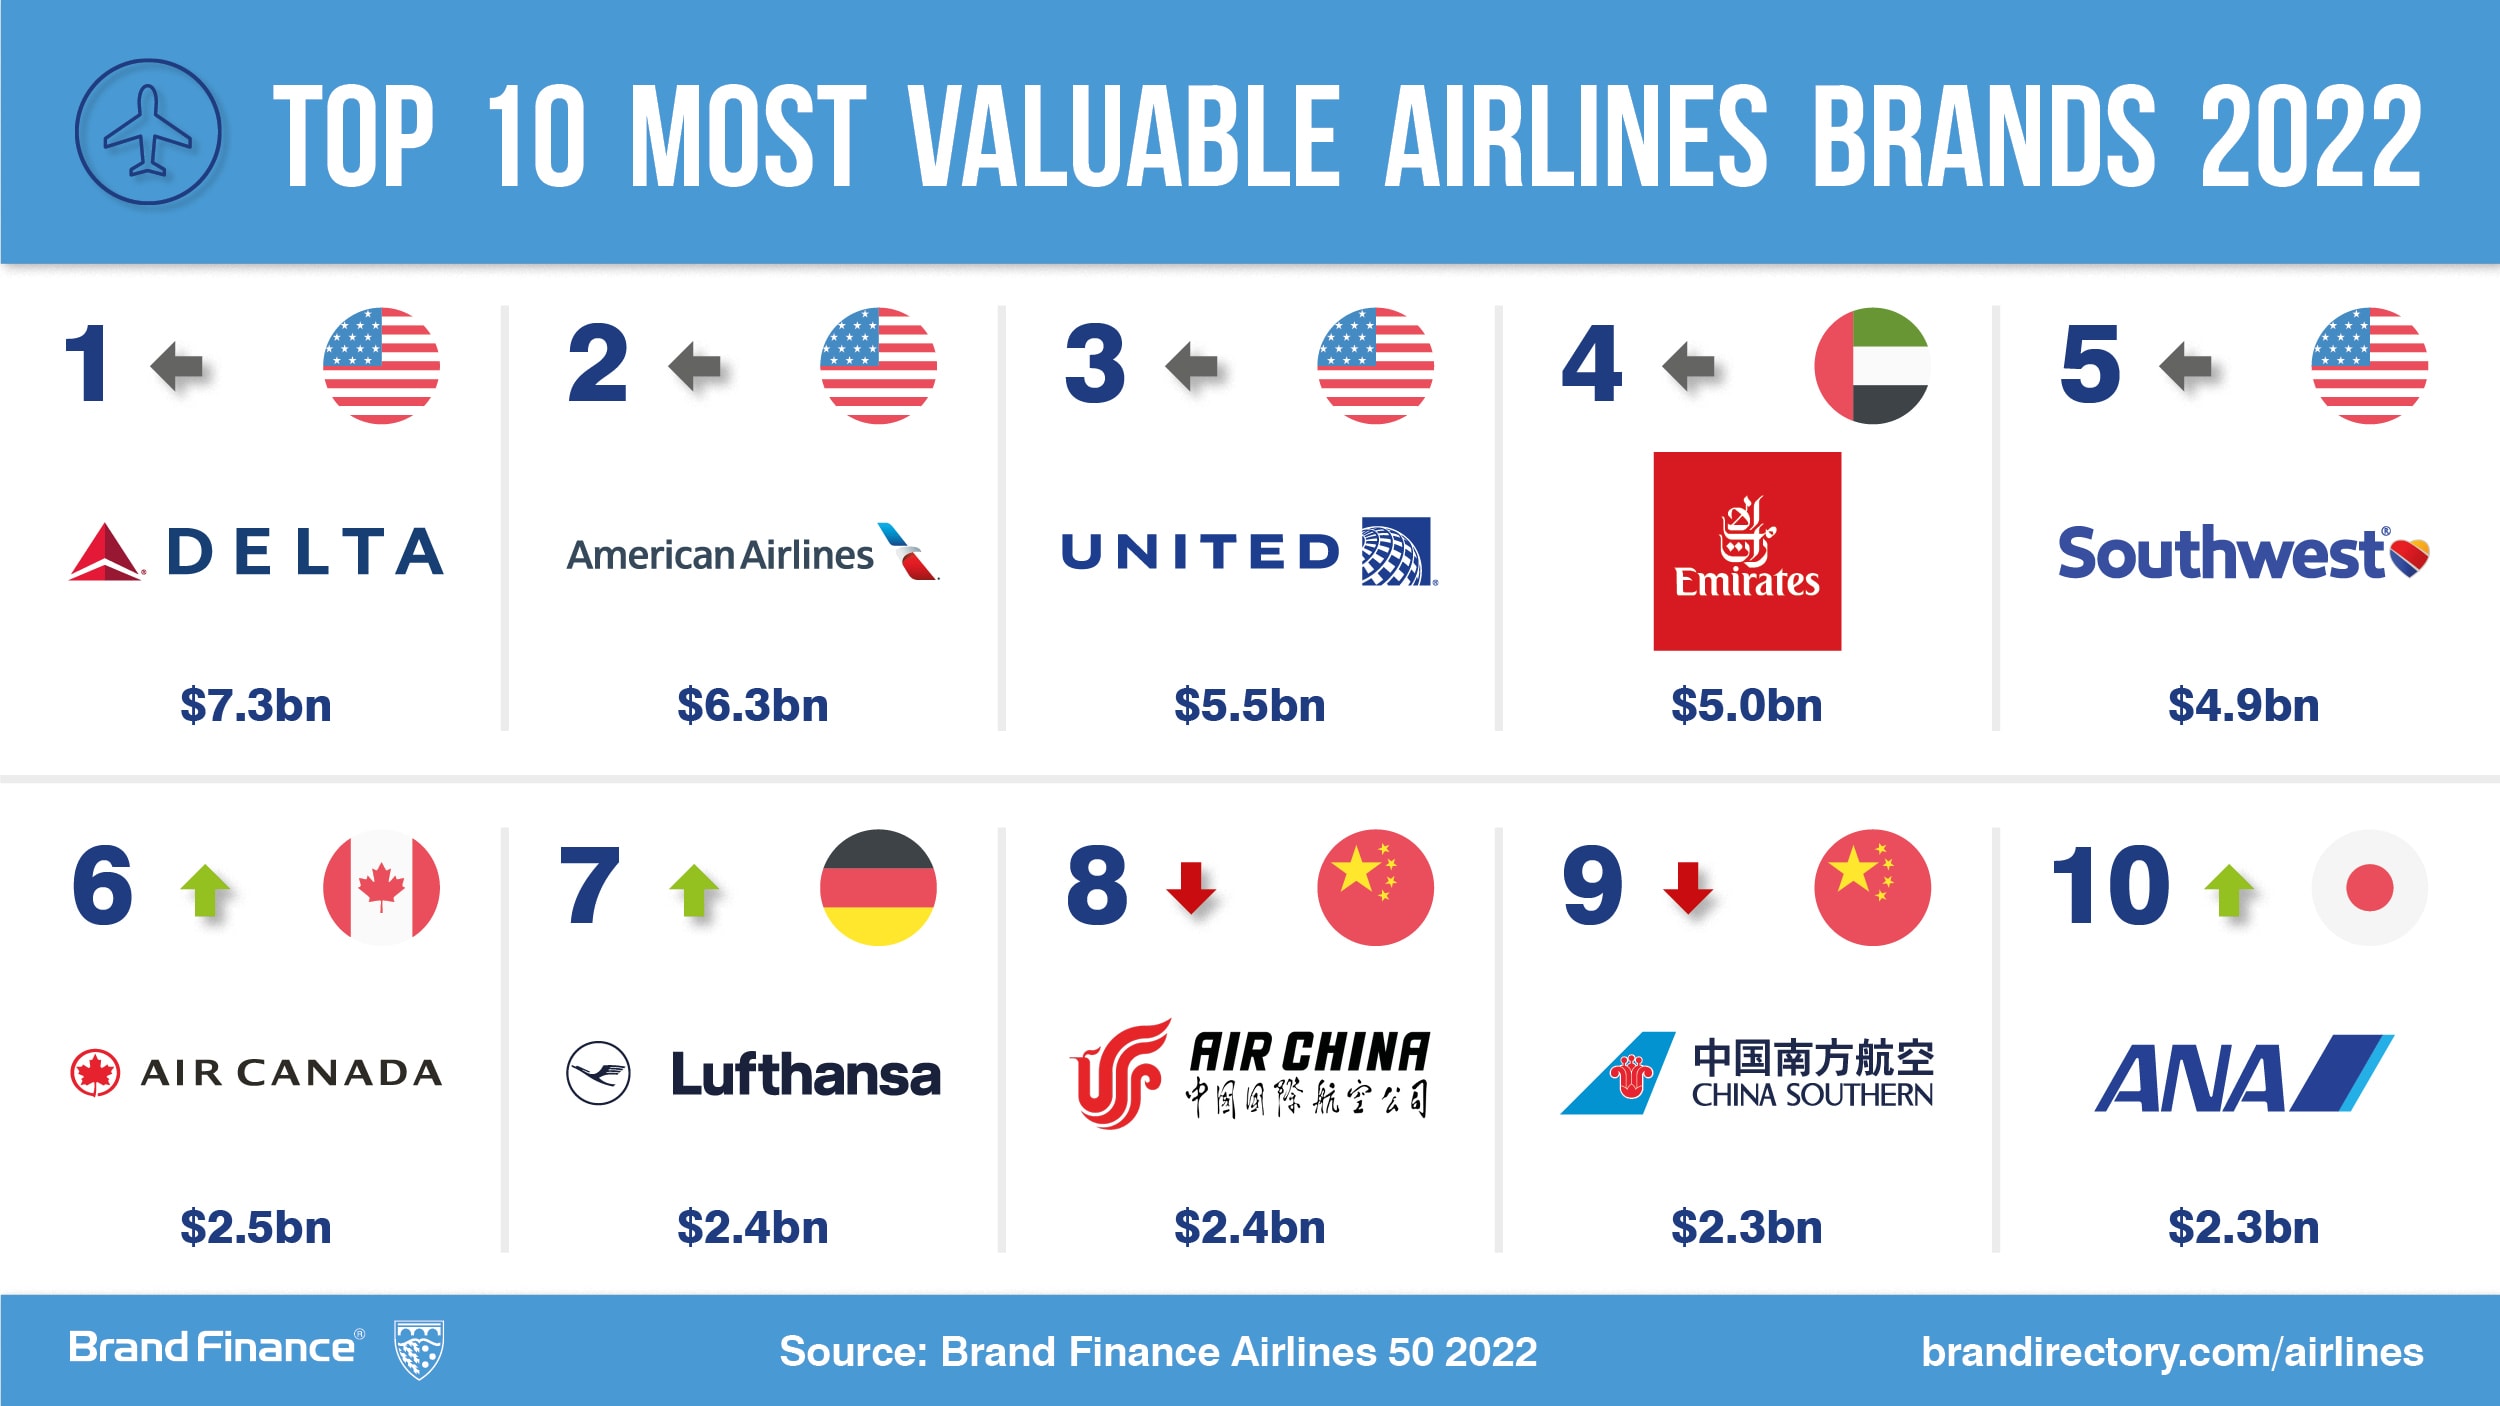 Delta retains top position as most valuable airlines brand in the world